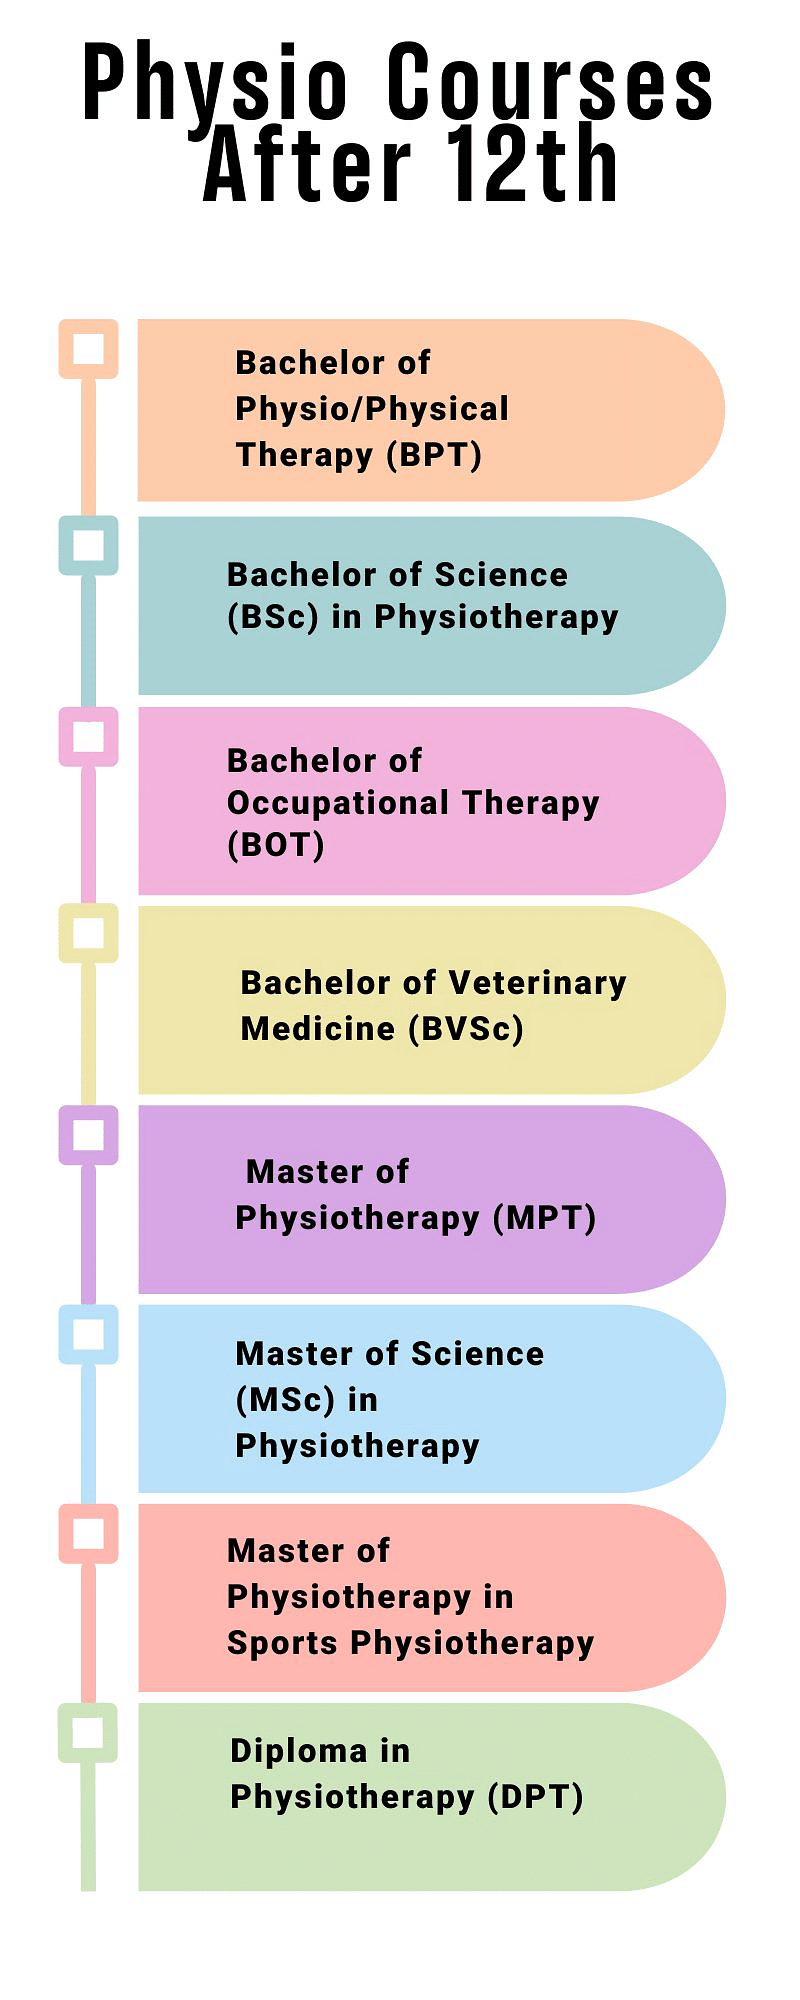 Physiotherapy Courses After 12th Class